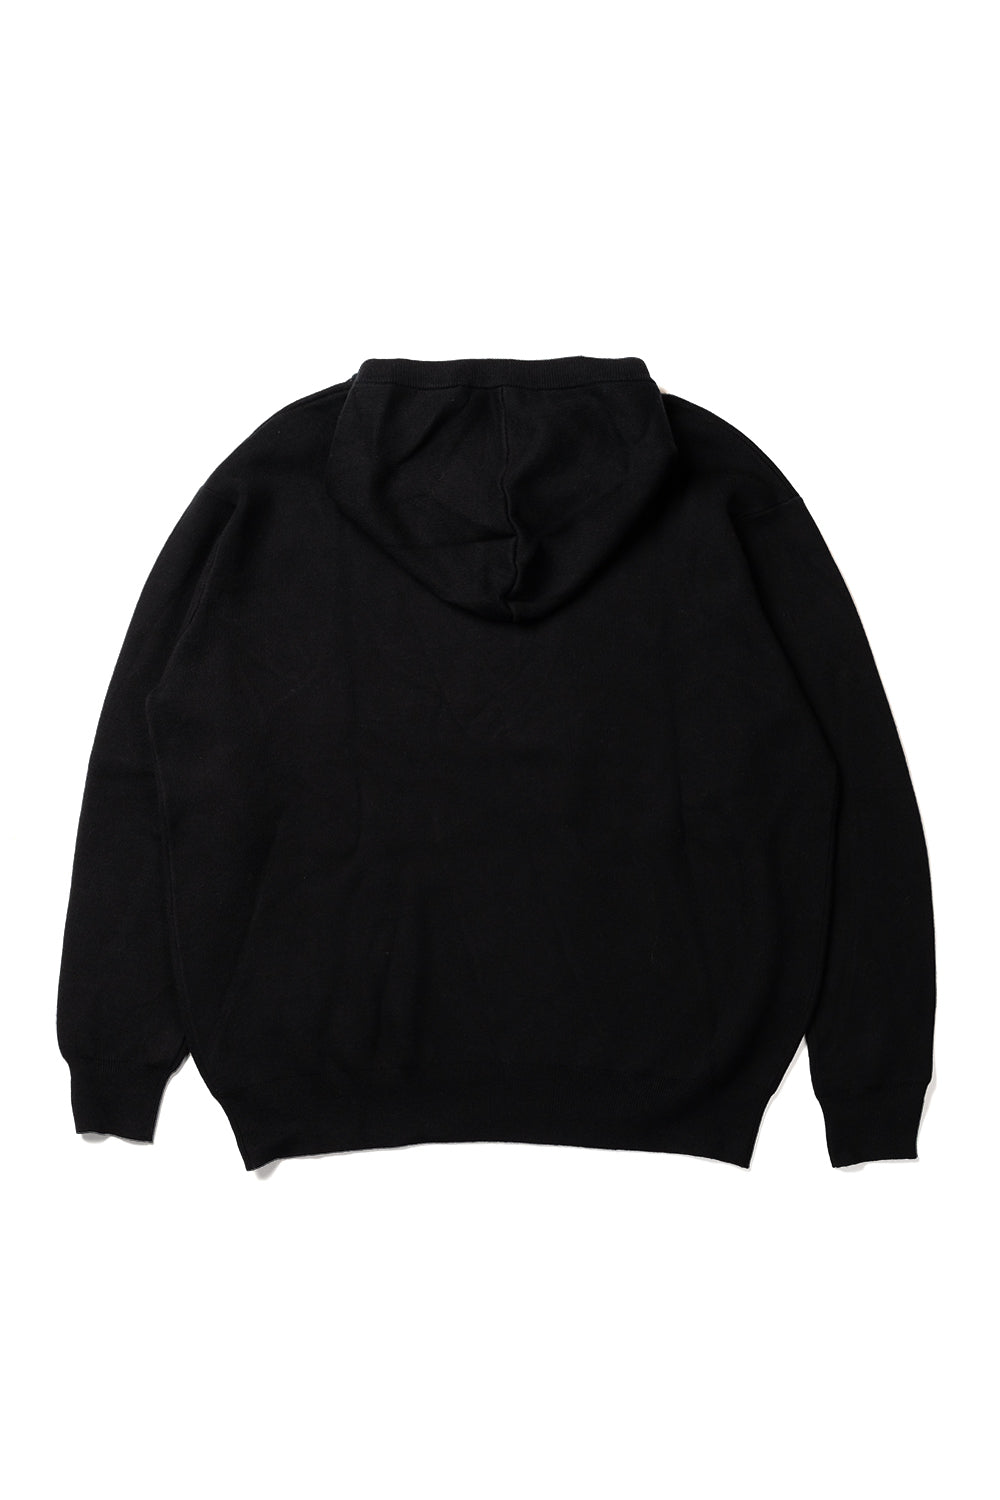 12G smouth knit hoodie